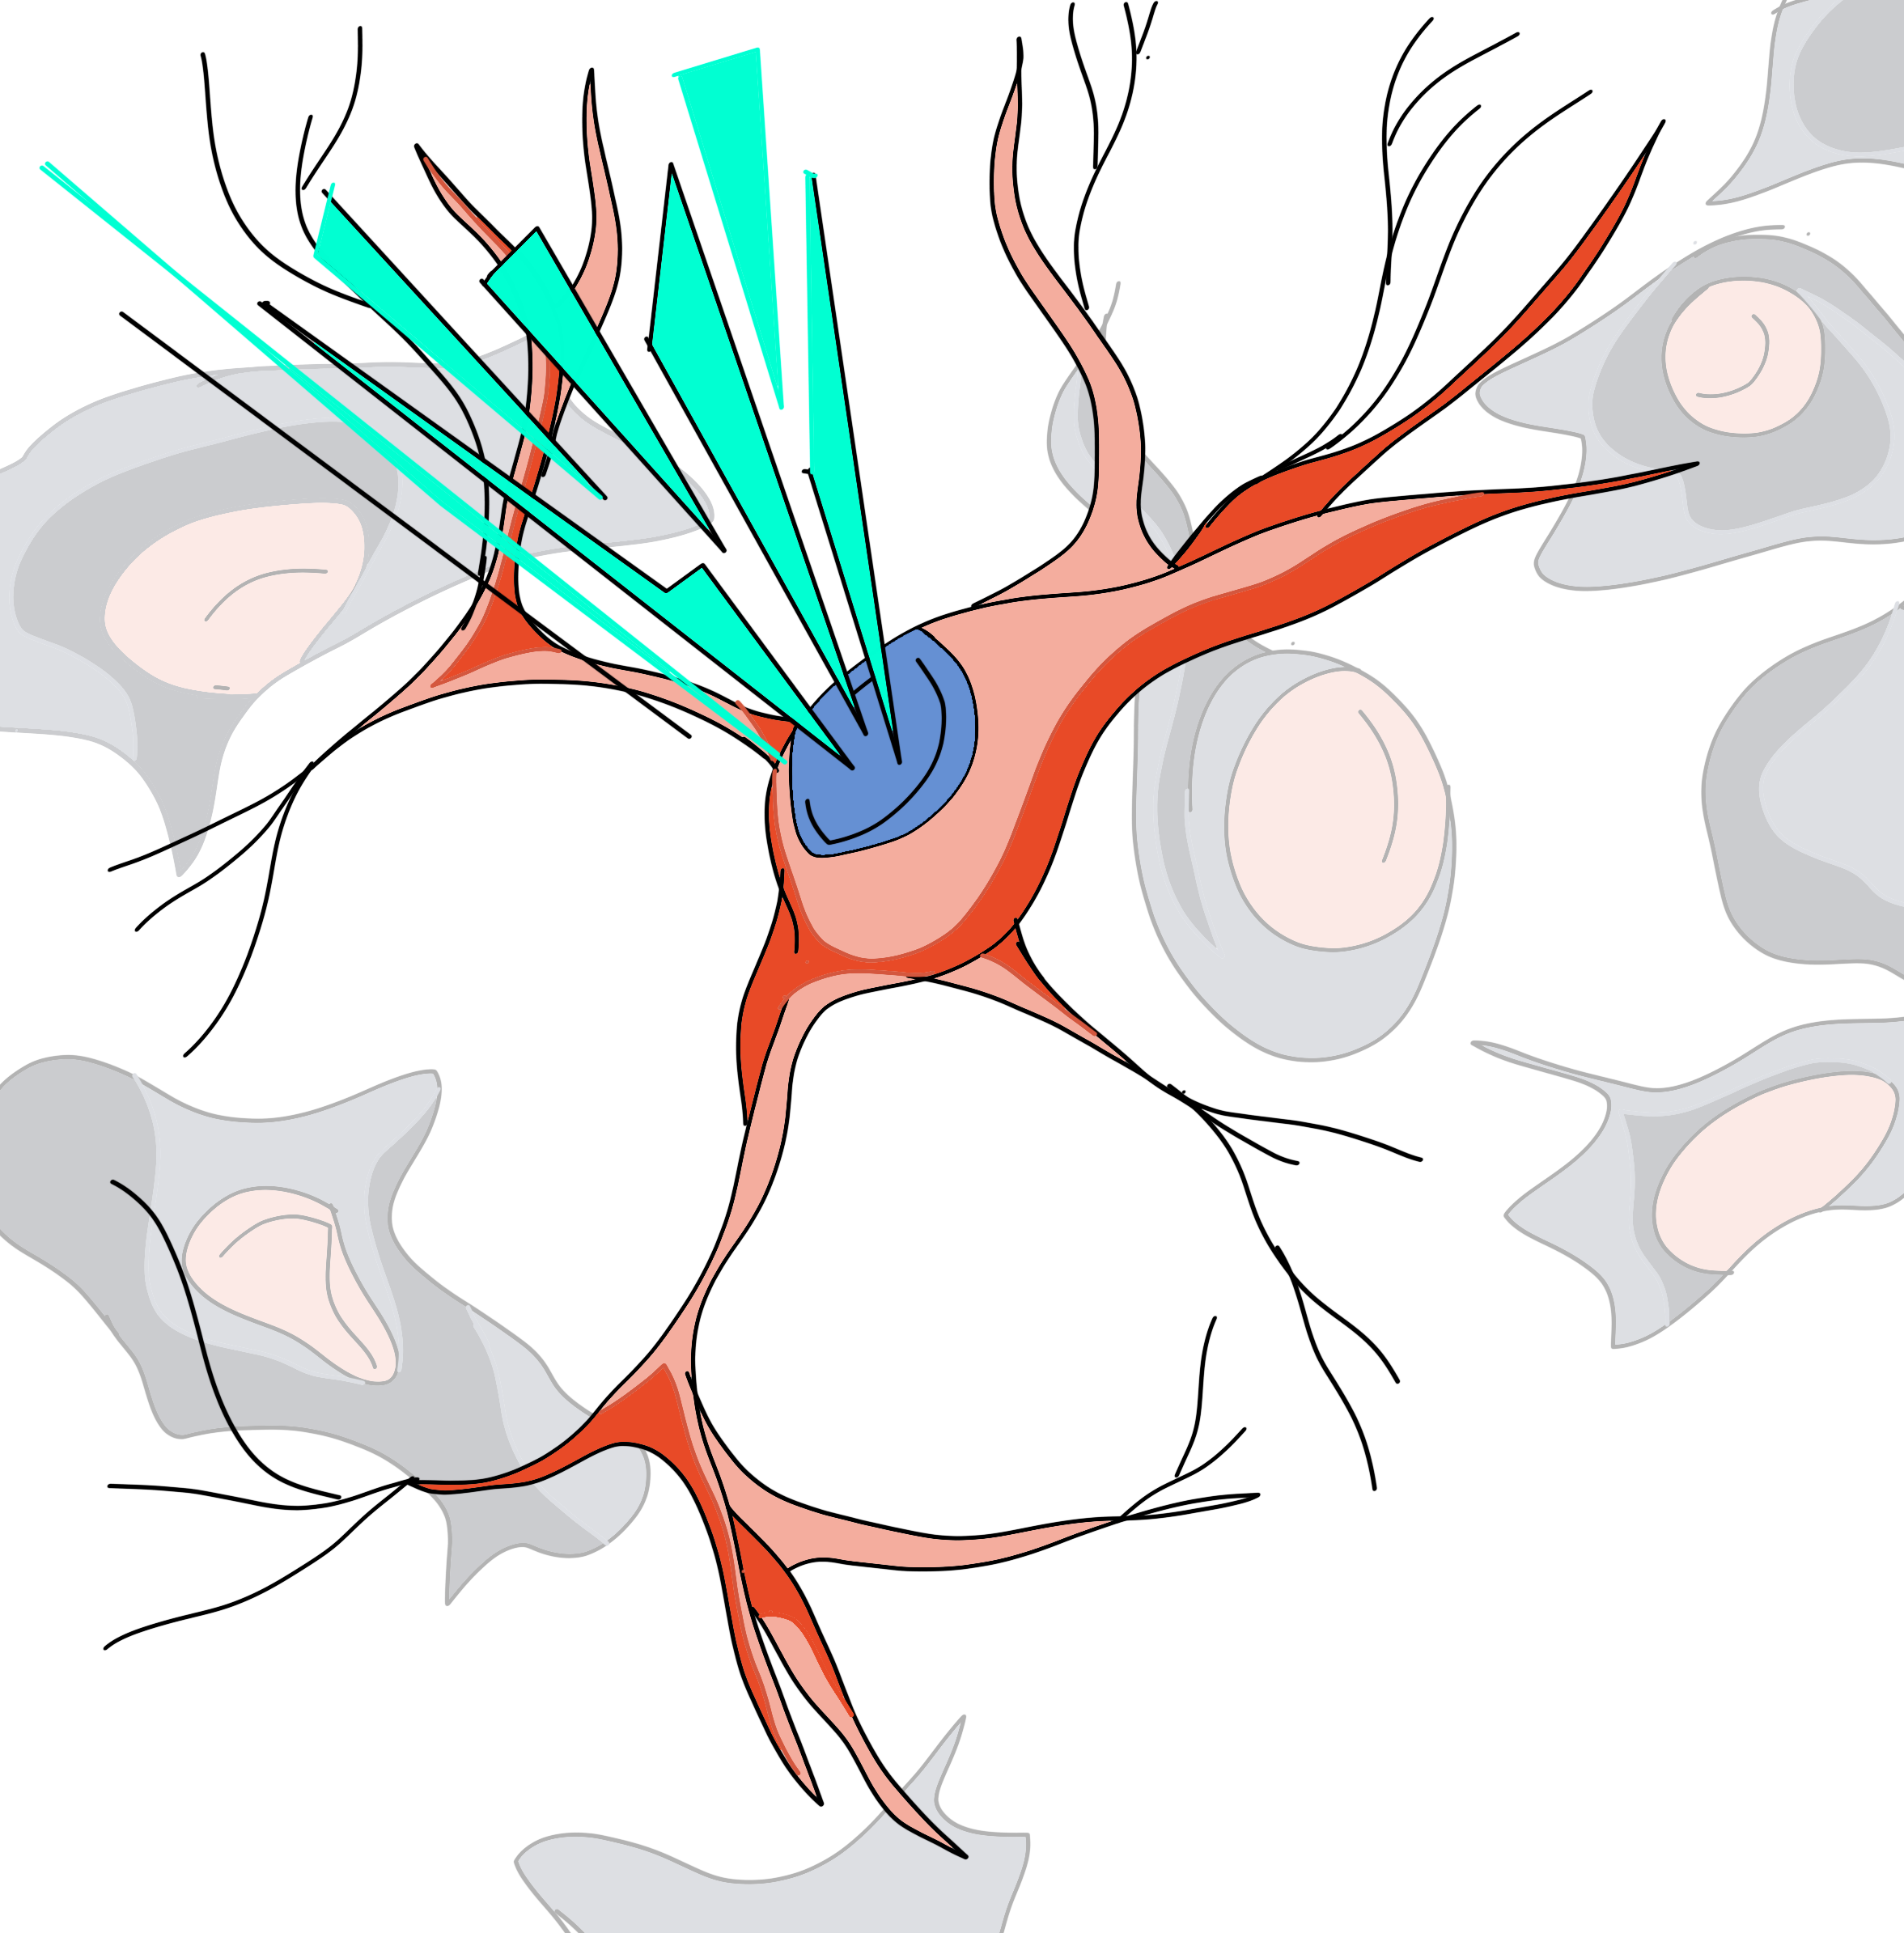 Single cell optogenetics of neurons